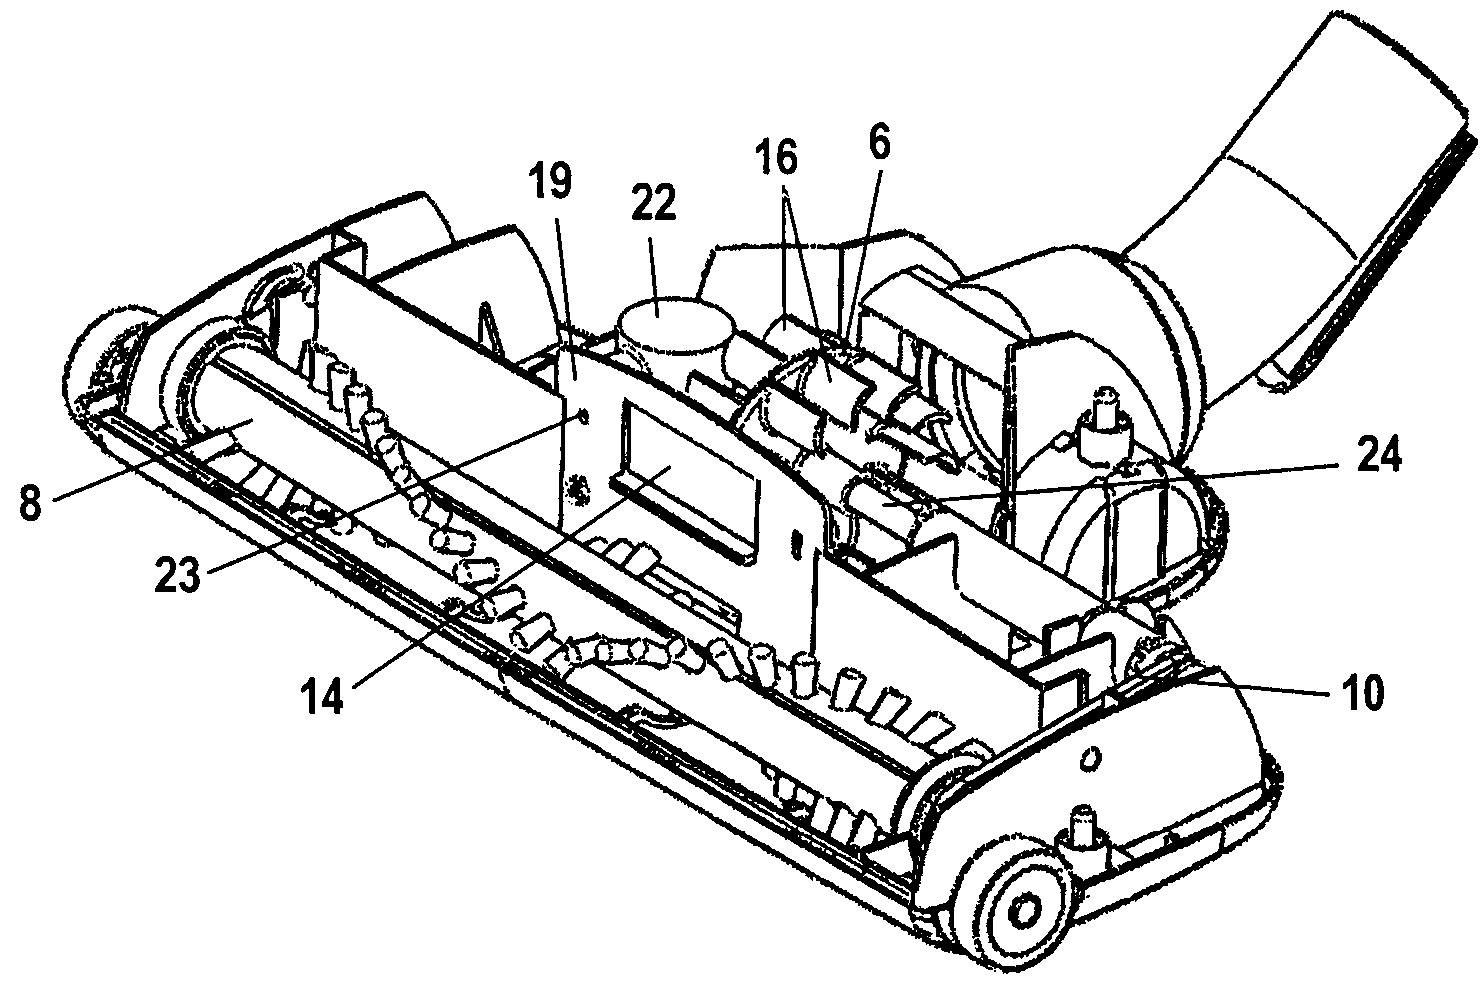 Vacuum cleaning tool and method for its operation